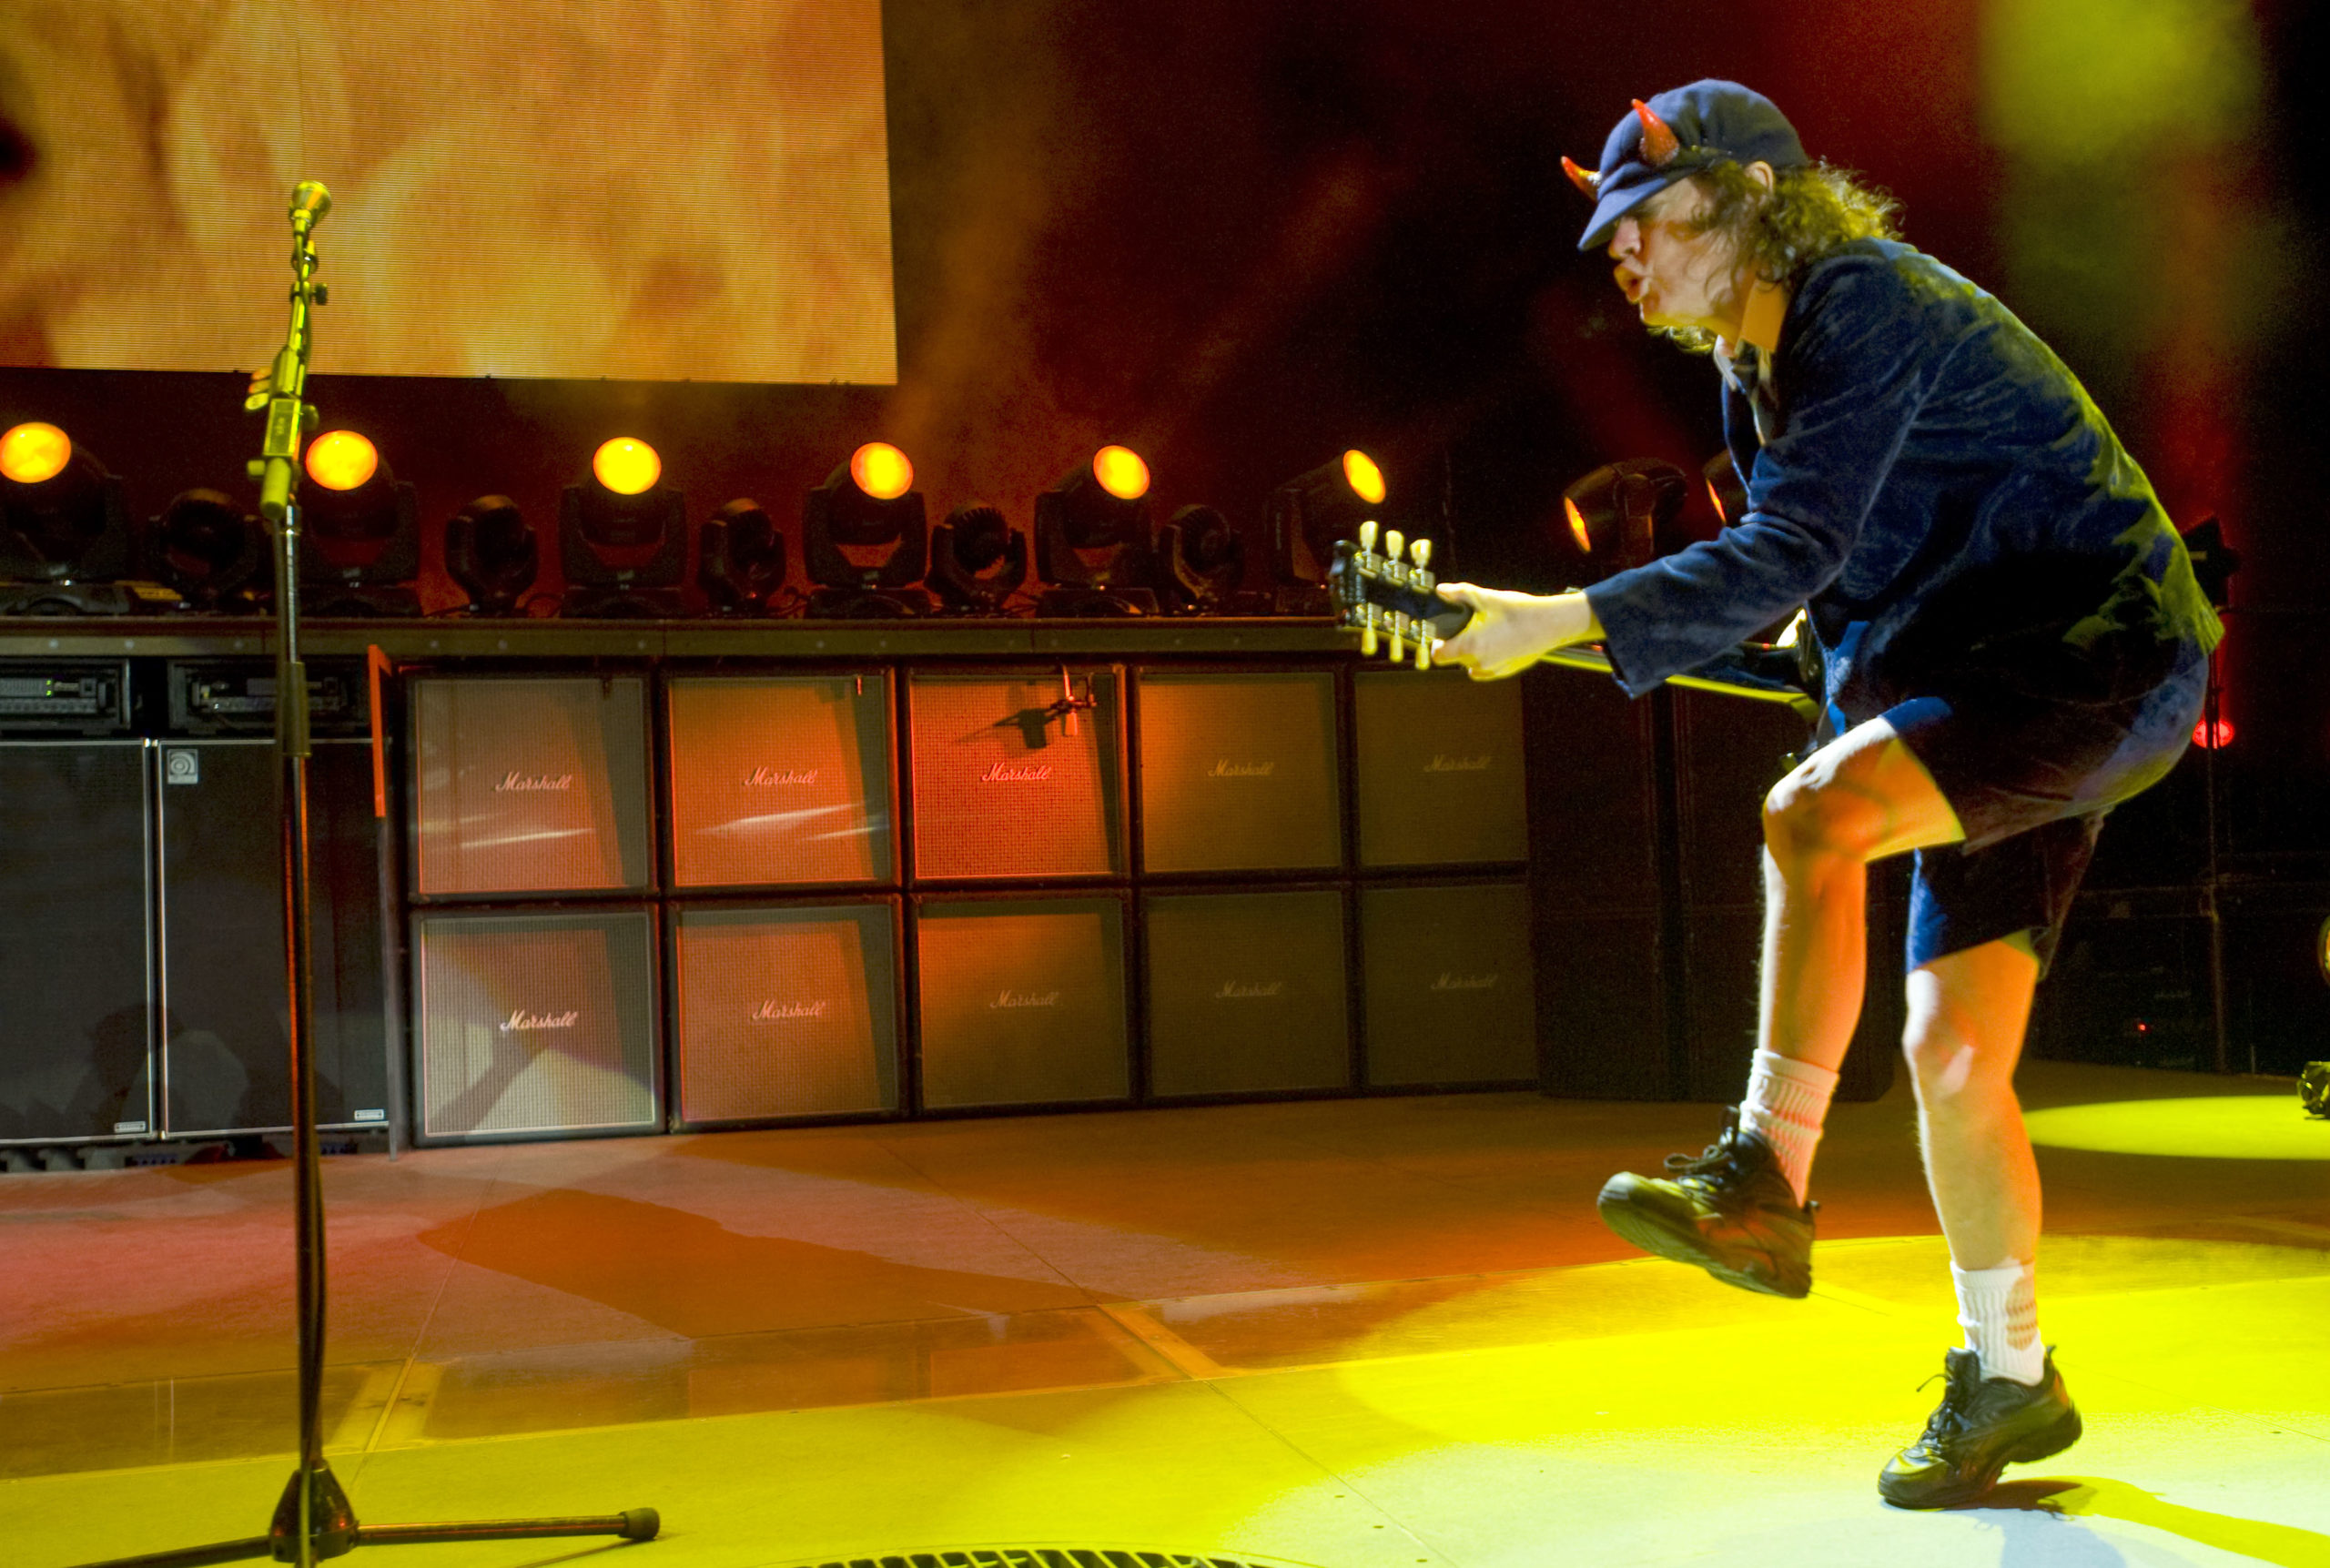 AC/DC – Live At River Plate